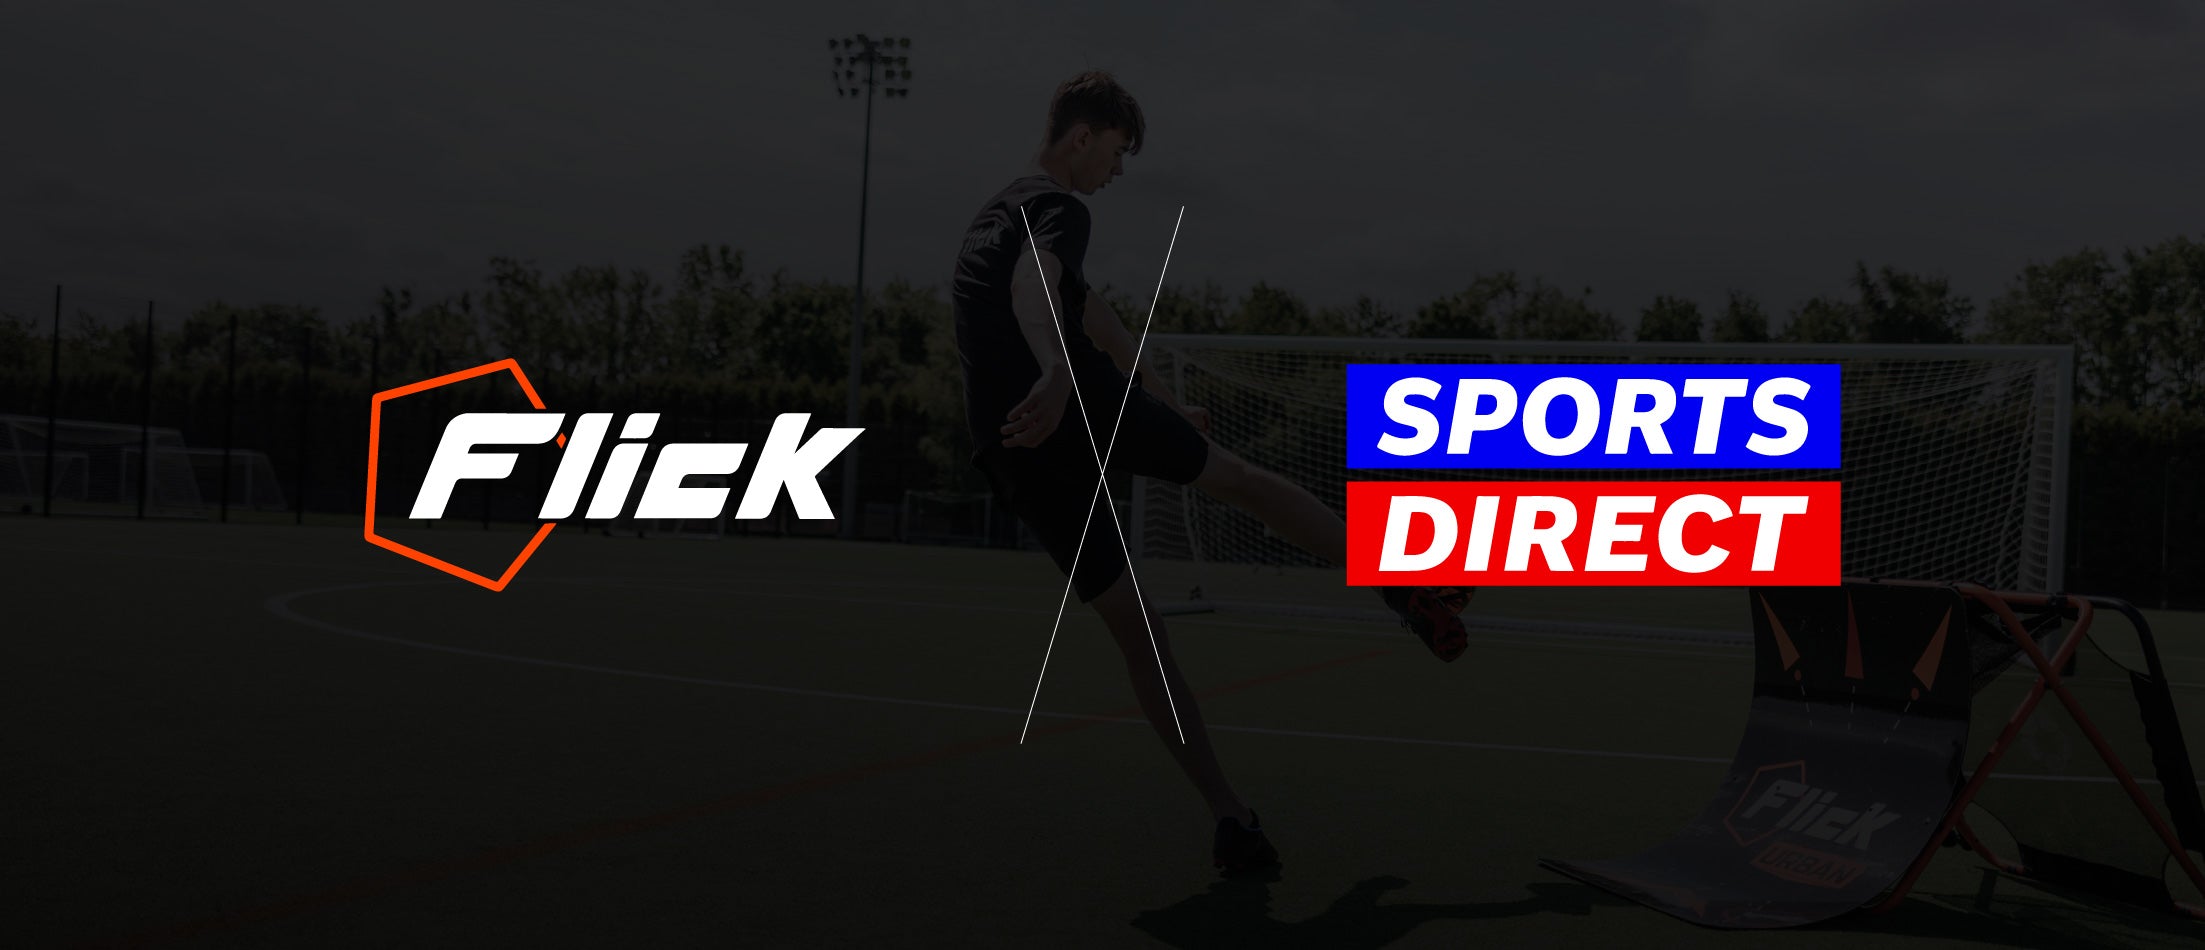 Flick Announce New Retail Partnership With Sports Direct